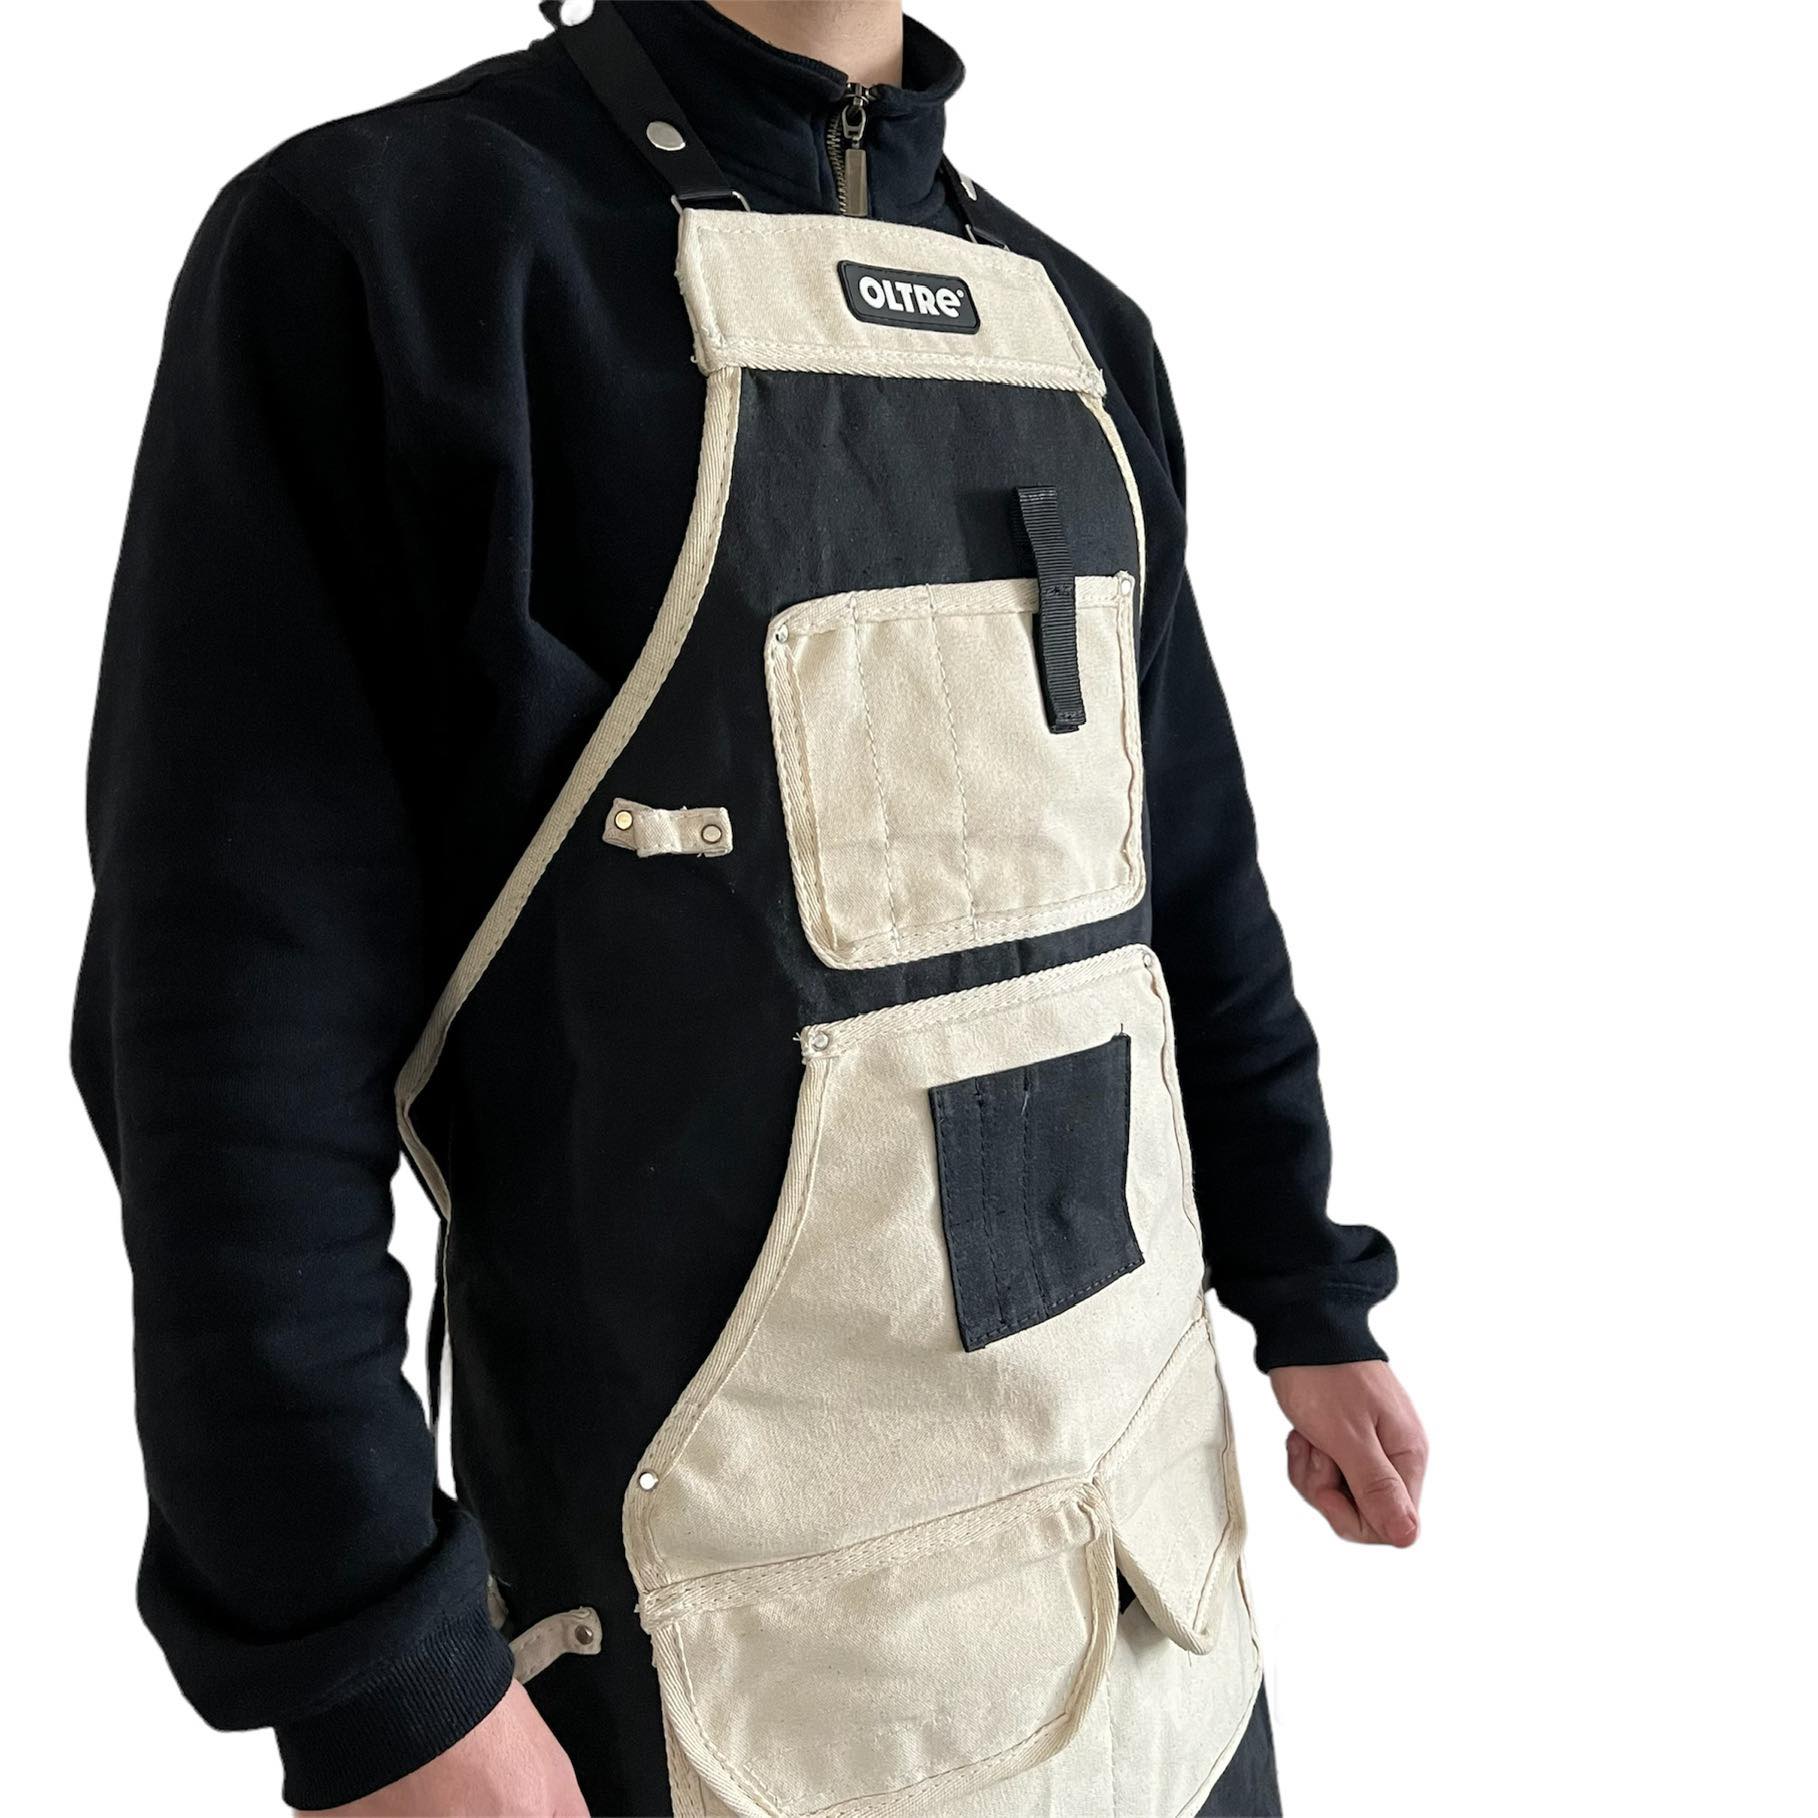 Black + White Canvas Apron By Oltre *New Arrival*